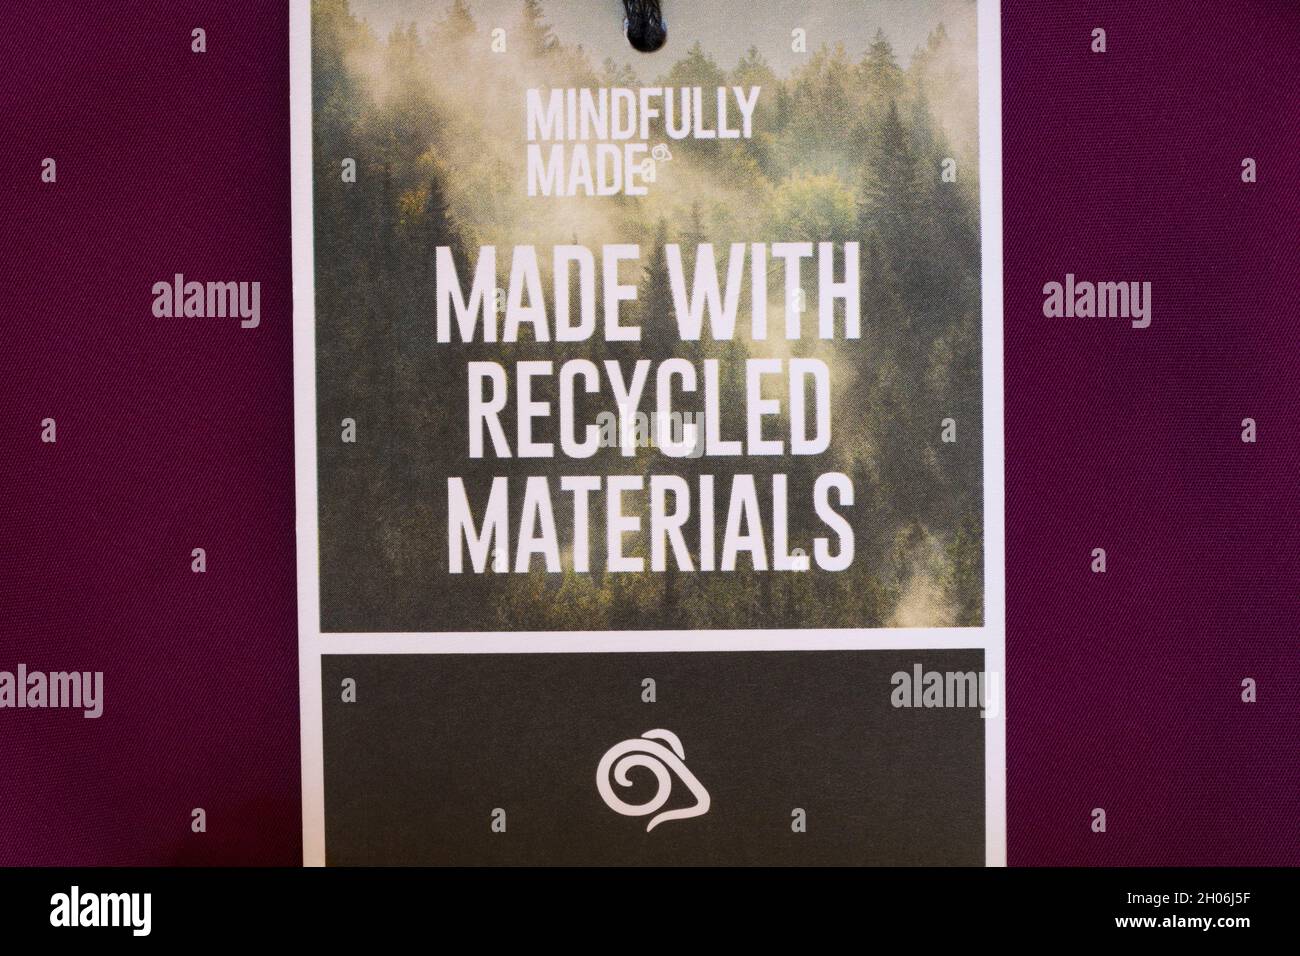 Mindfully made made with recycled materials - label on Craghoppers jacket Stock Photo